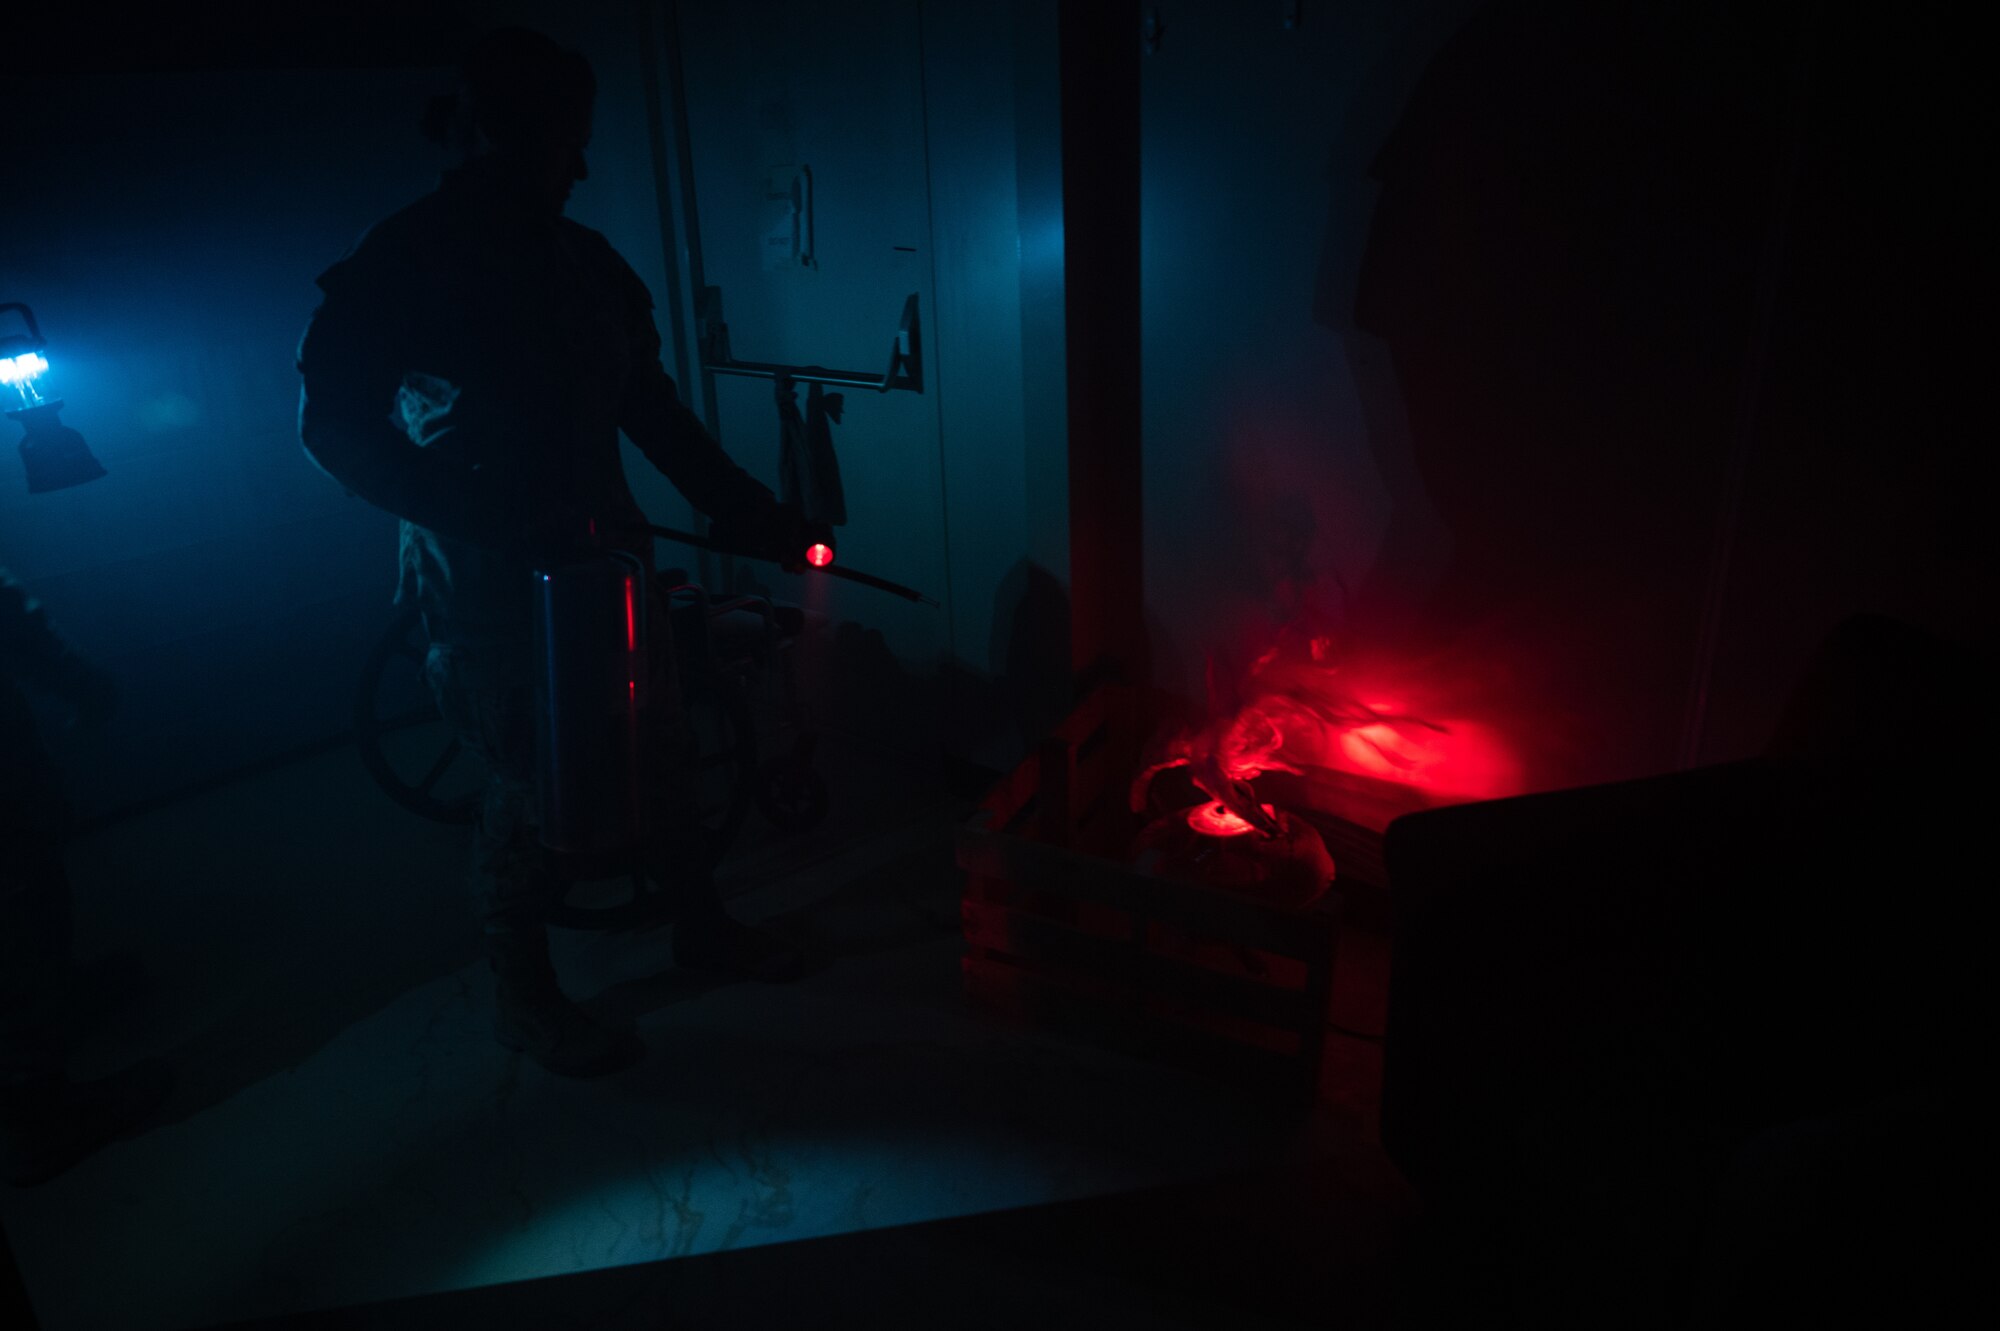 U.S. Air Force Lt. Col. Korinne K. Takeyama, 379th Expeditionary Civil Engineer Squadron commander, extinguishes the simulated flames in a fire escape room exercise for fire safety awareness Oct. 12, 2022 at Al Udeid Air Base, Qatar. The Airmen had to work together to find clues, unlock padlocks and perform a rescue as part of an exercise to impress upon people the importance and challenge of fire safety awareness.